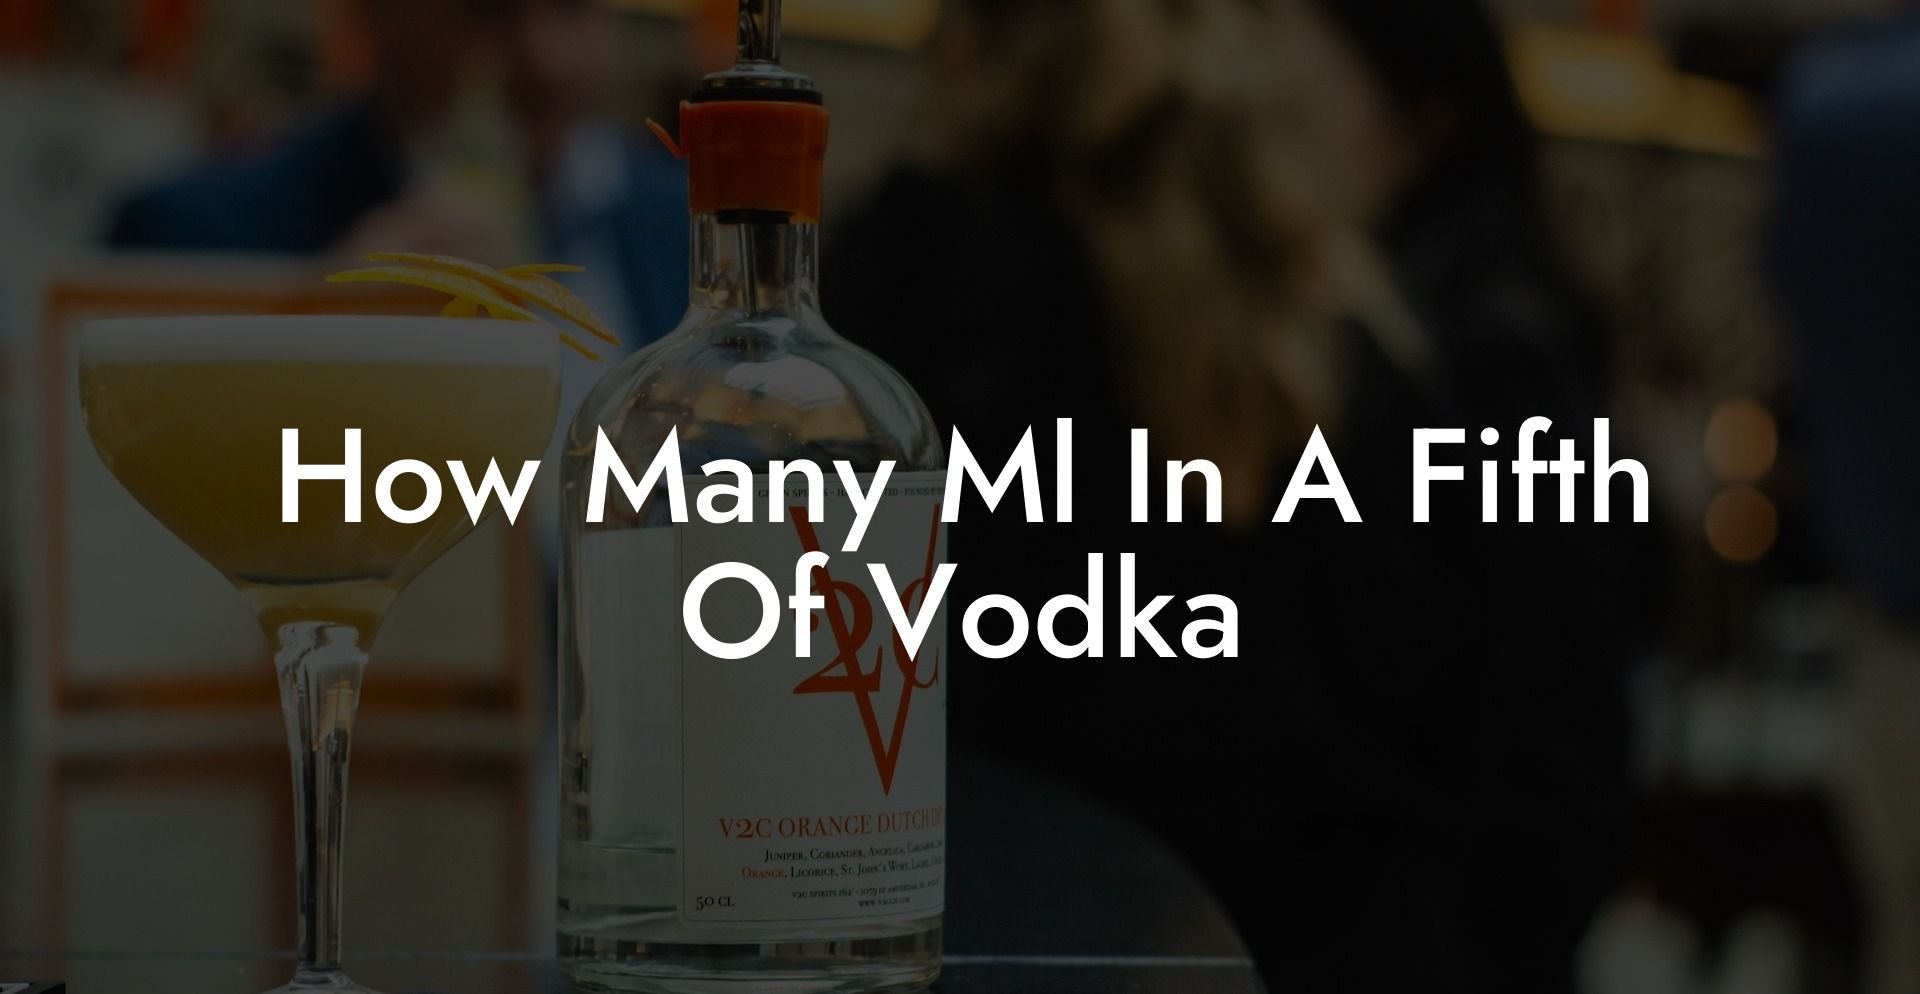 How Many Ml In A Fifth Of Vodka